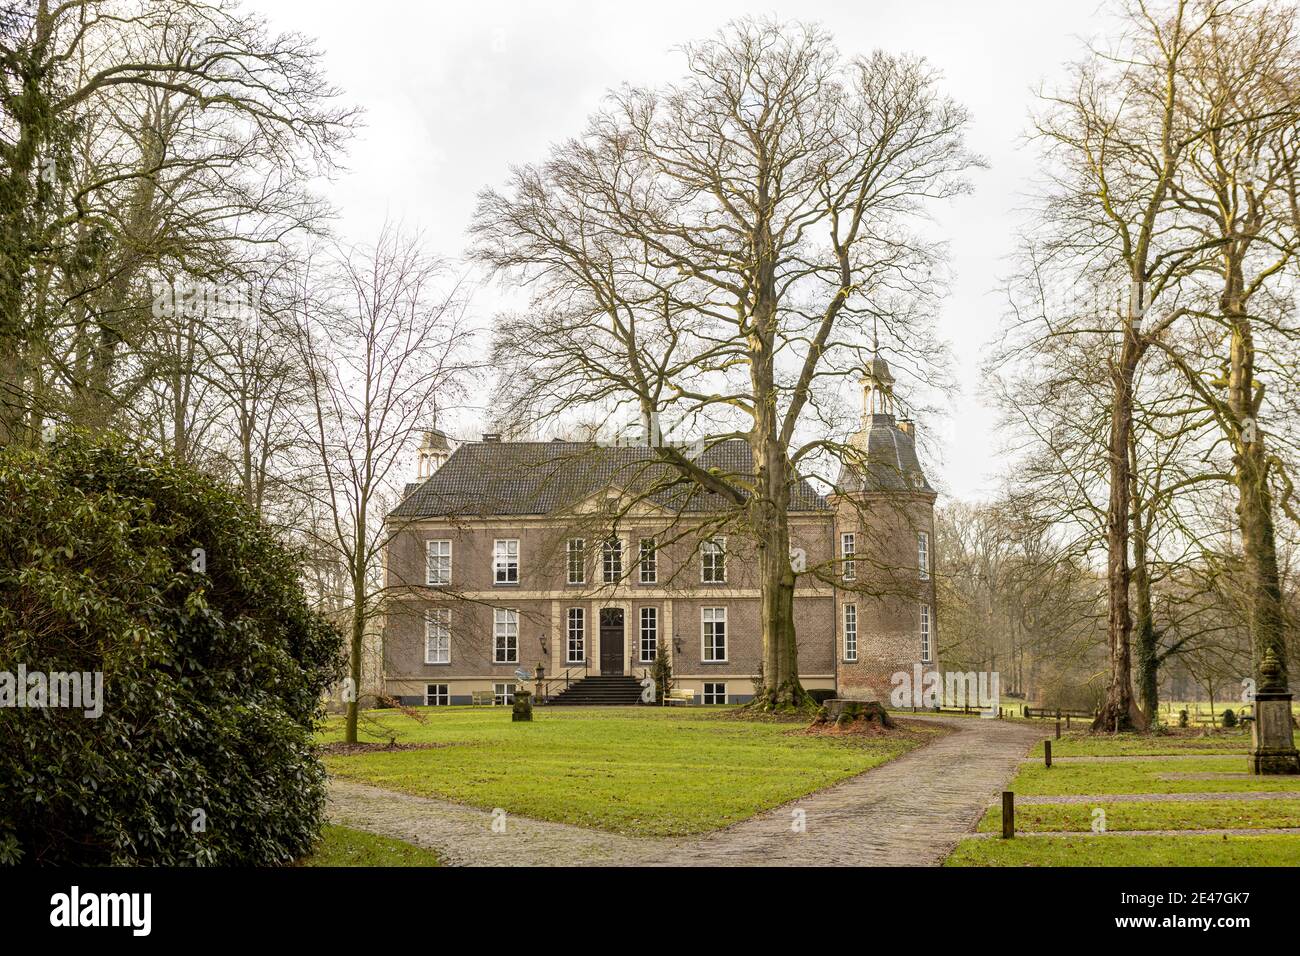 VORDEN, NETHERLANDS - Jan 08, 2021: Arrival yard and entrance of the stately Hackfort castle flanked by winter barren trees Stock Photo